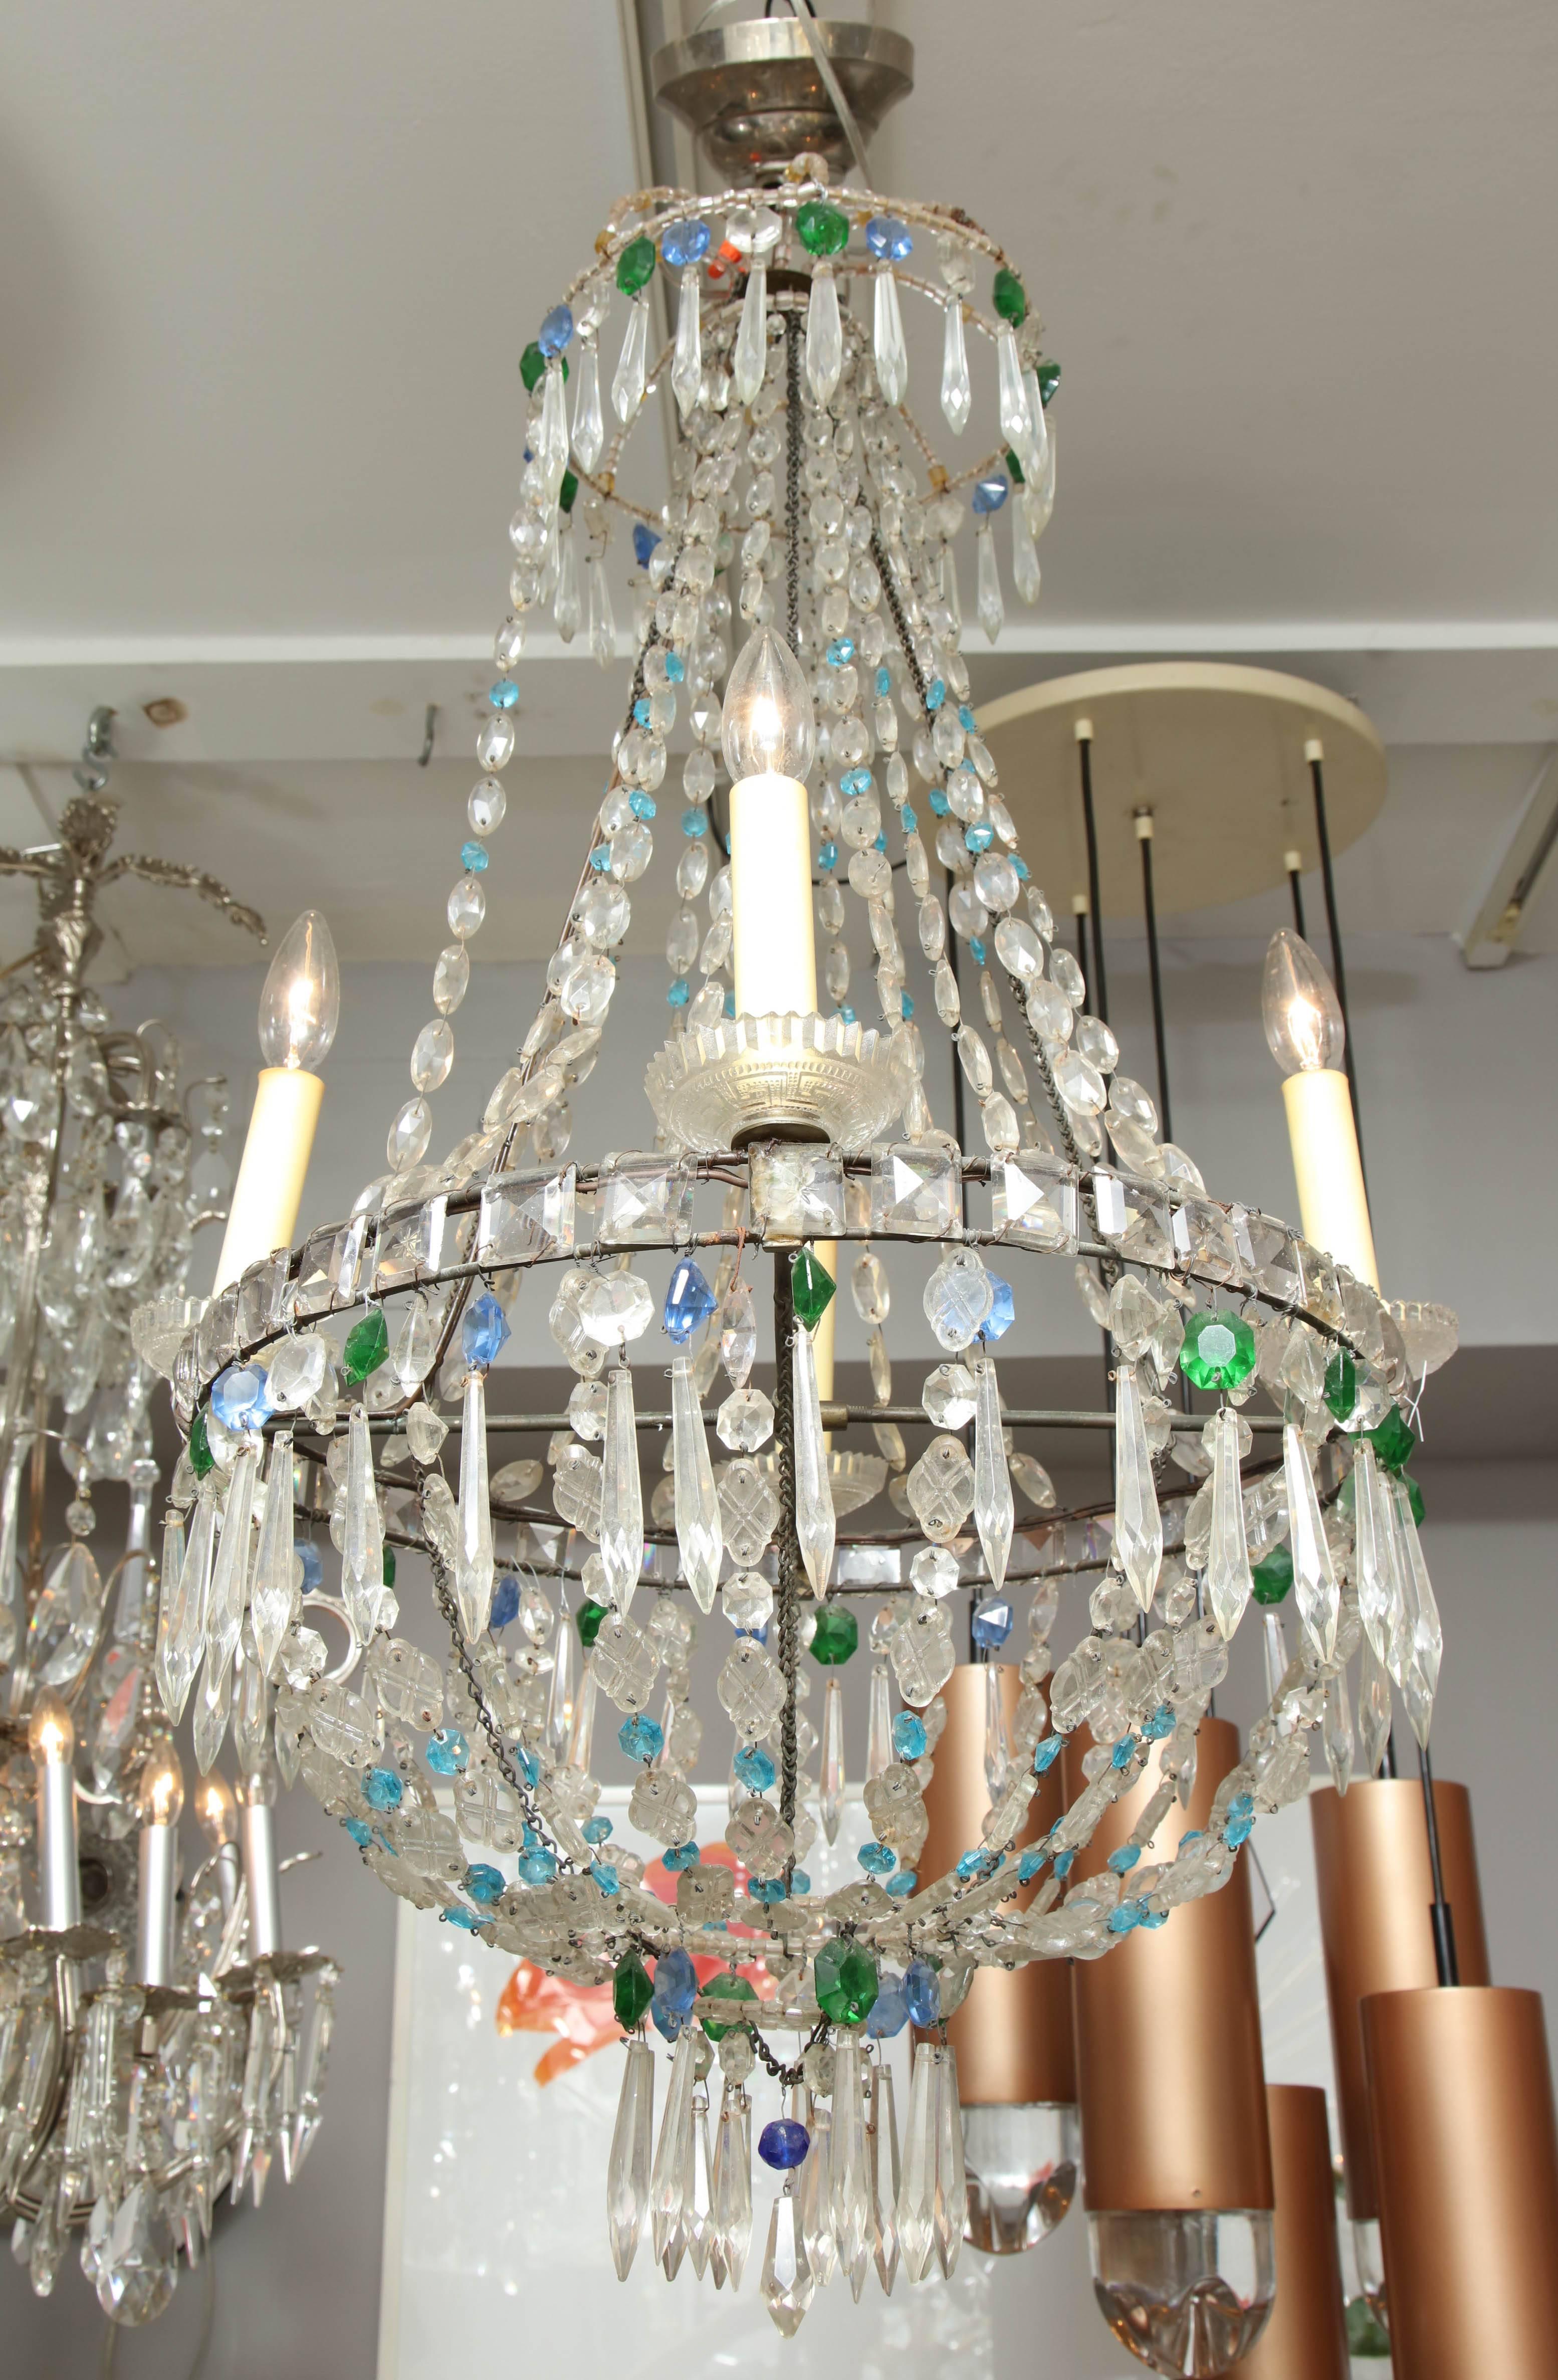 19th century turquoise and emerald crystal chandelier.